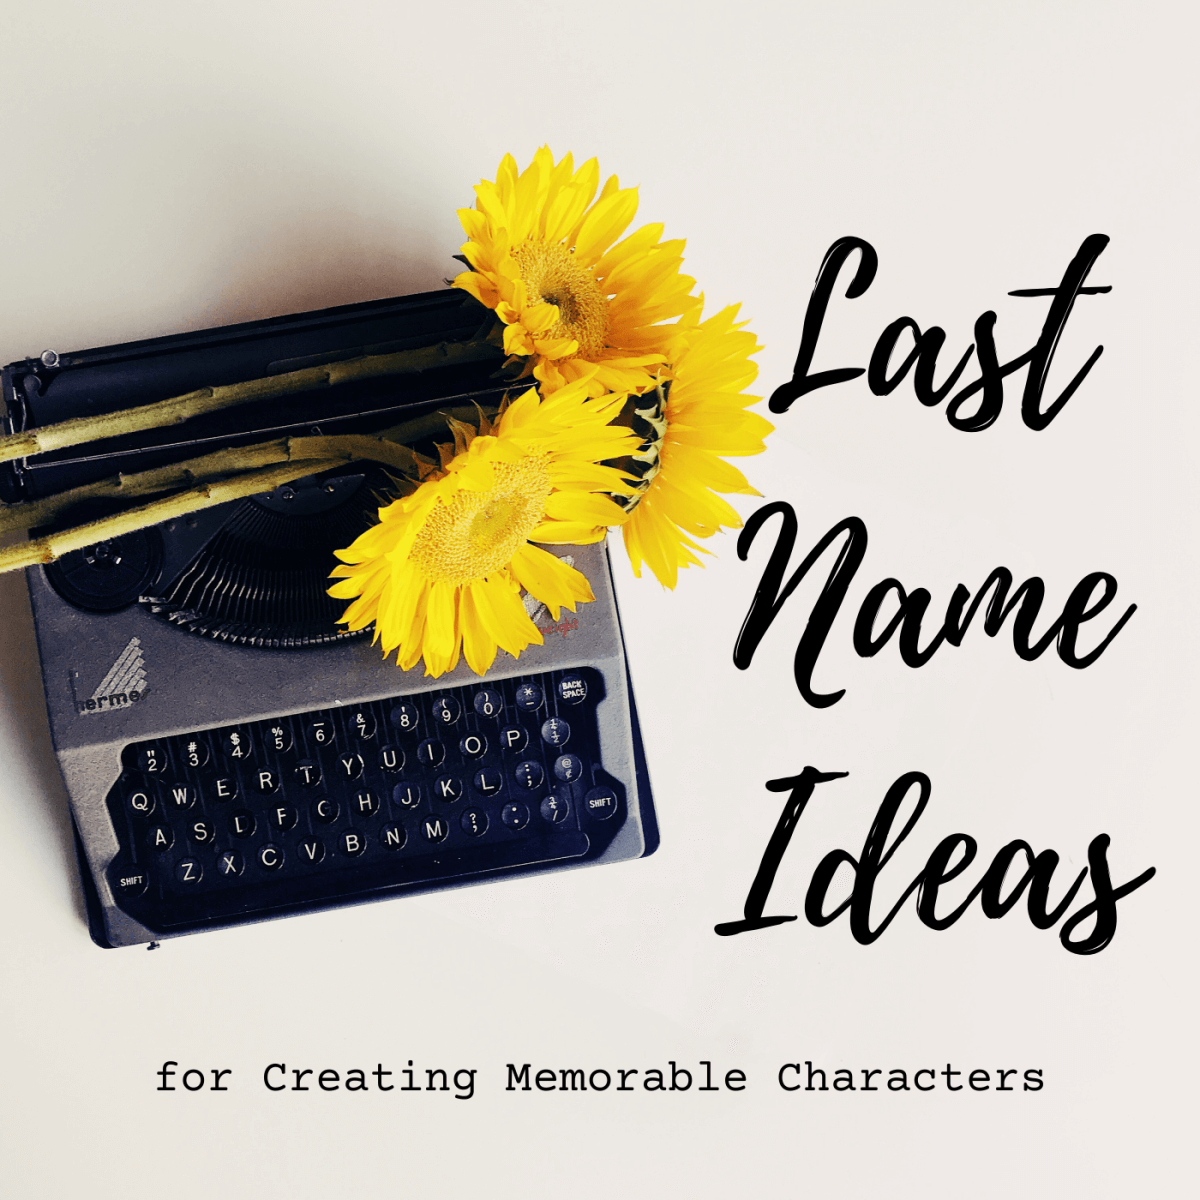 Choosing the perfect last name for your character doesn't have to be hard.